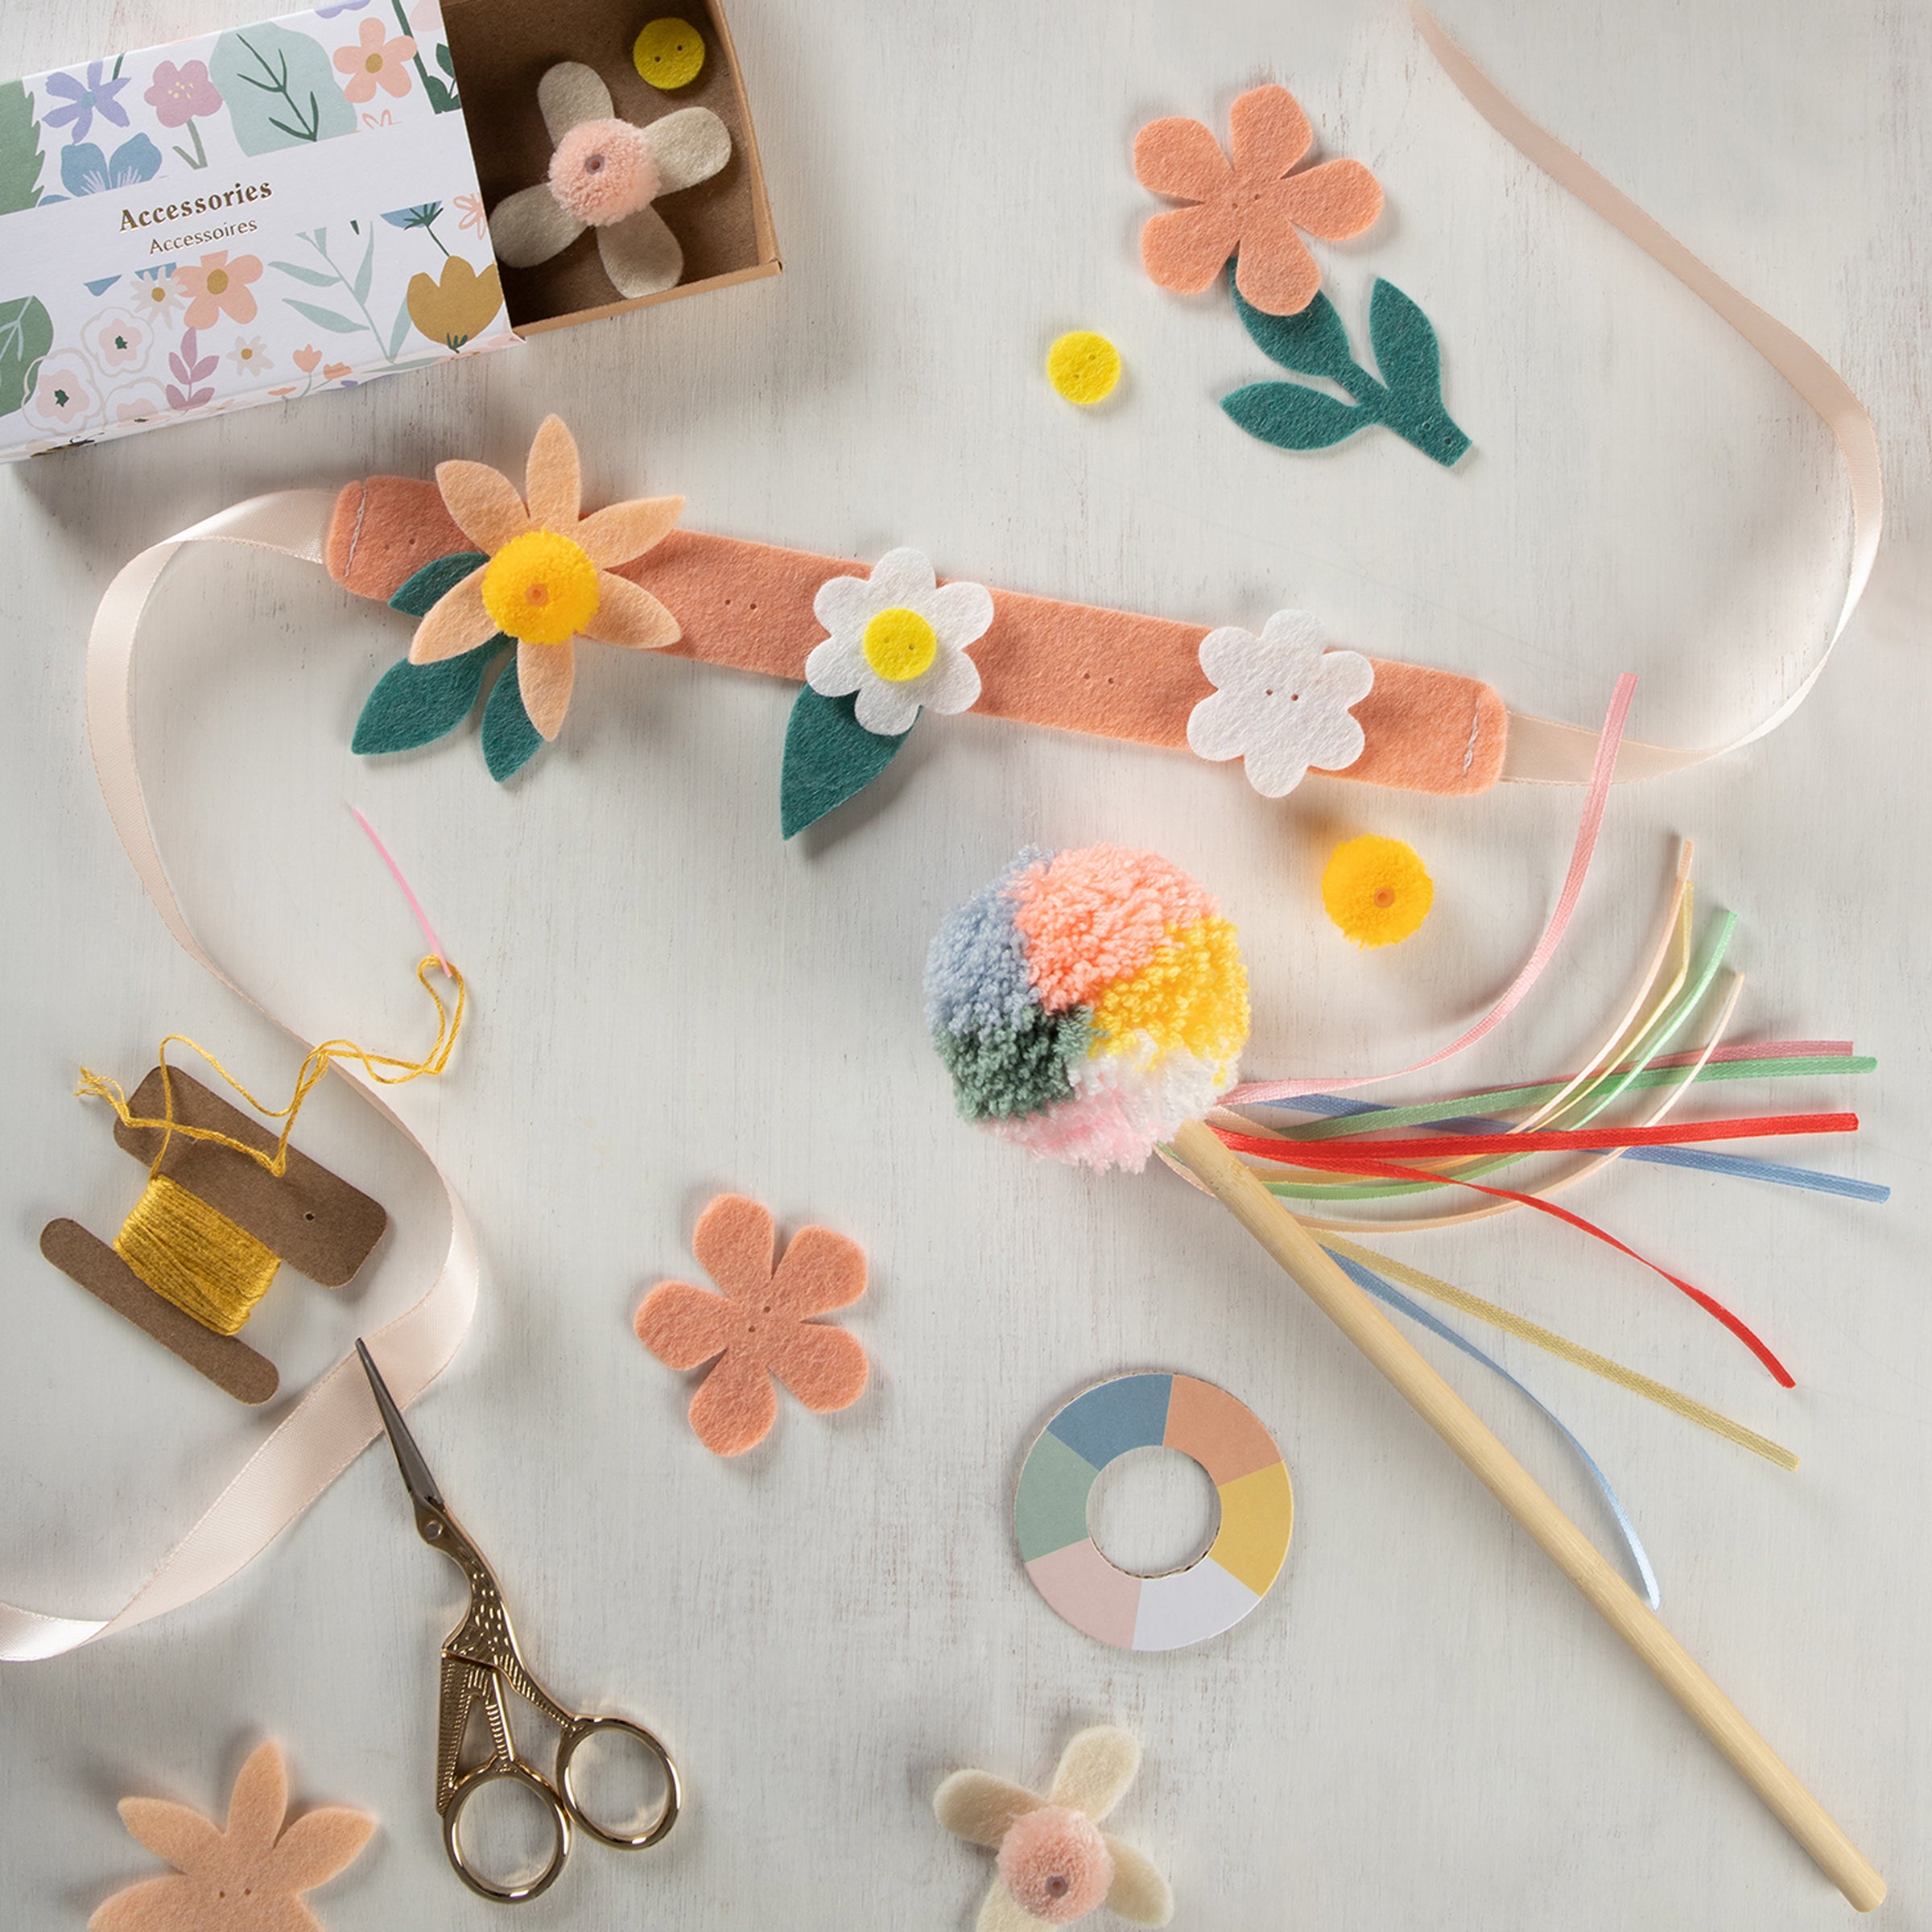 DIY paper Flower Crown craft kit. Get crafty today • Happythought